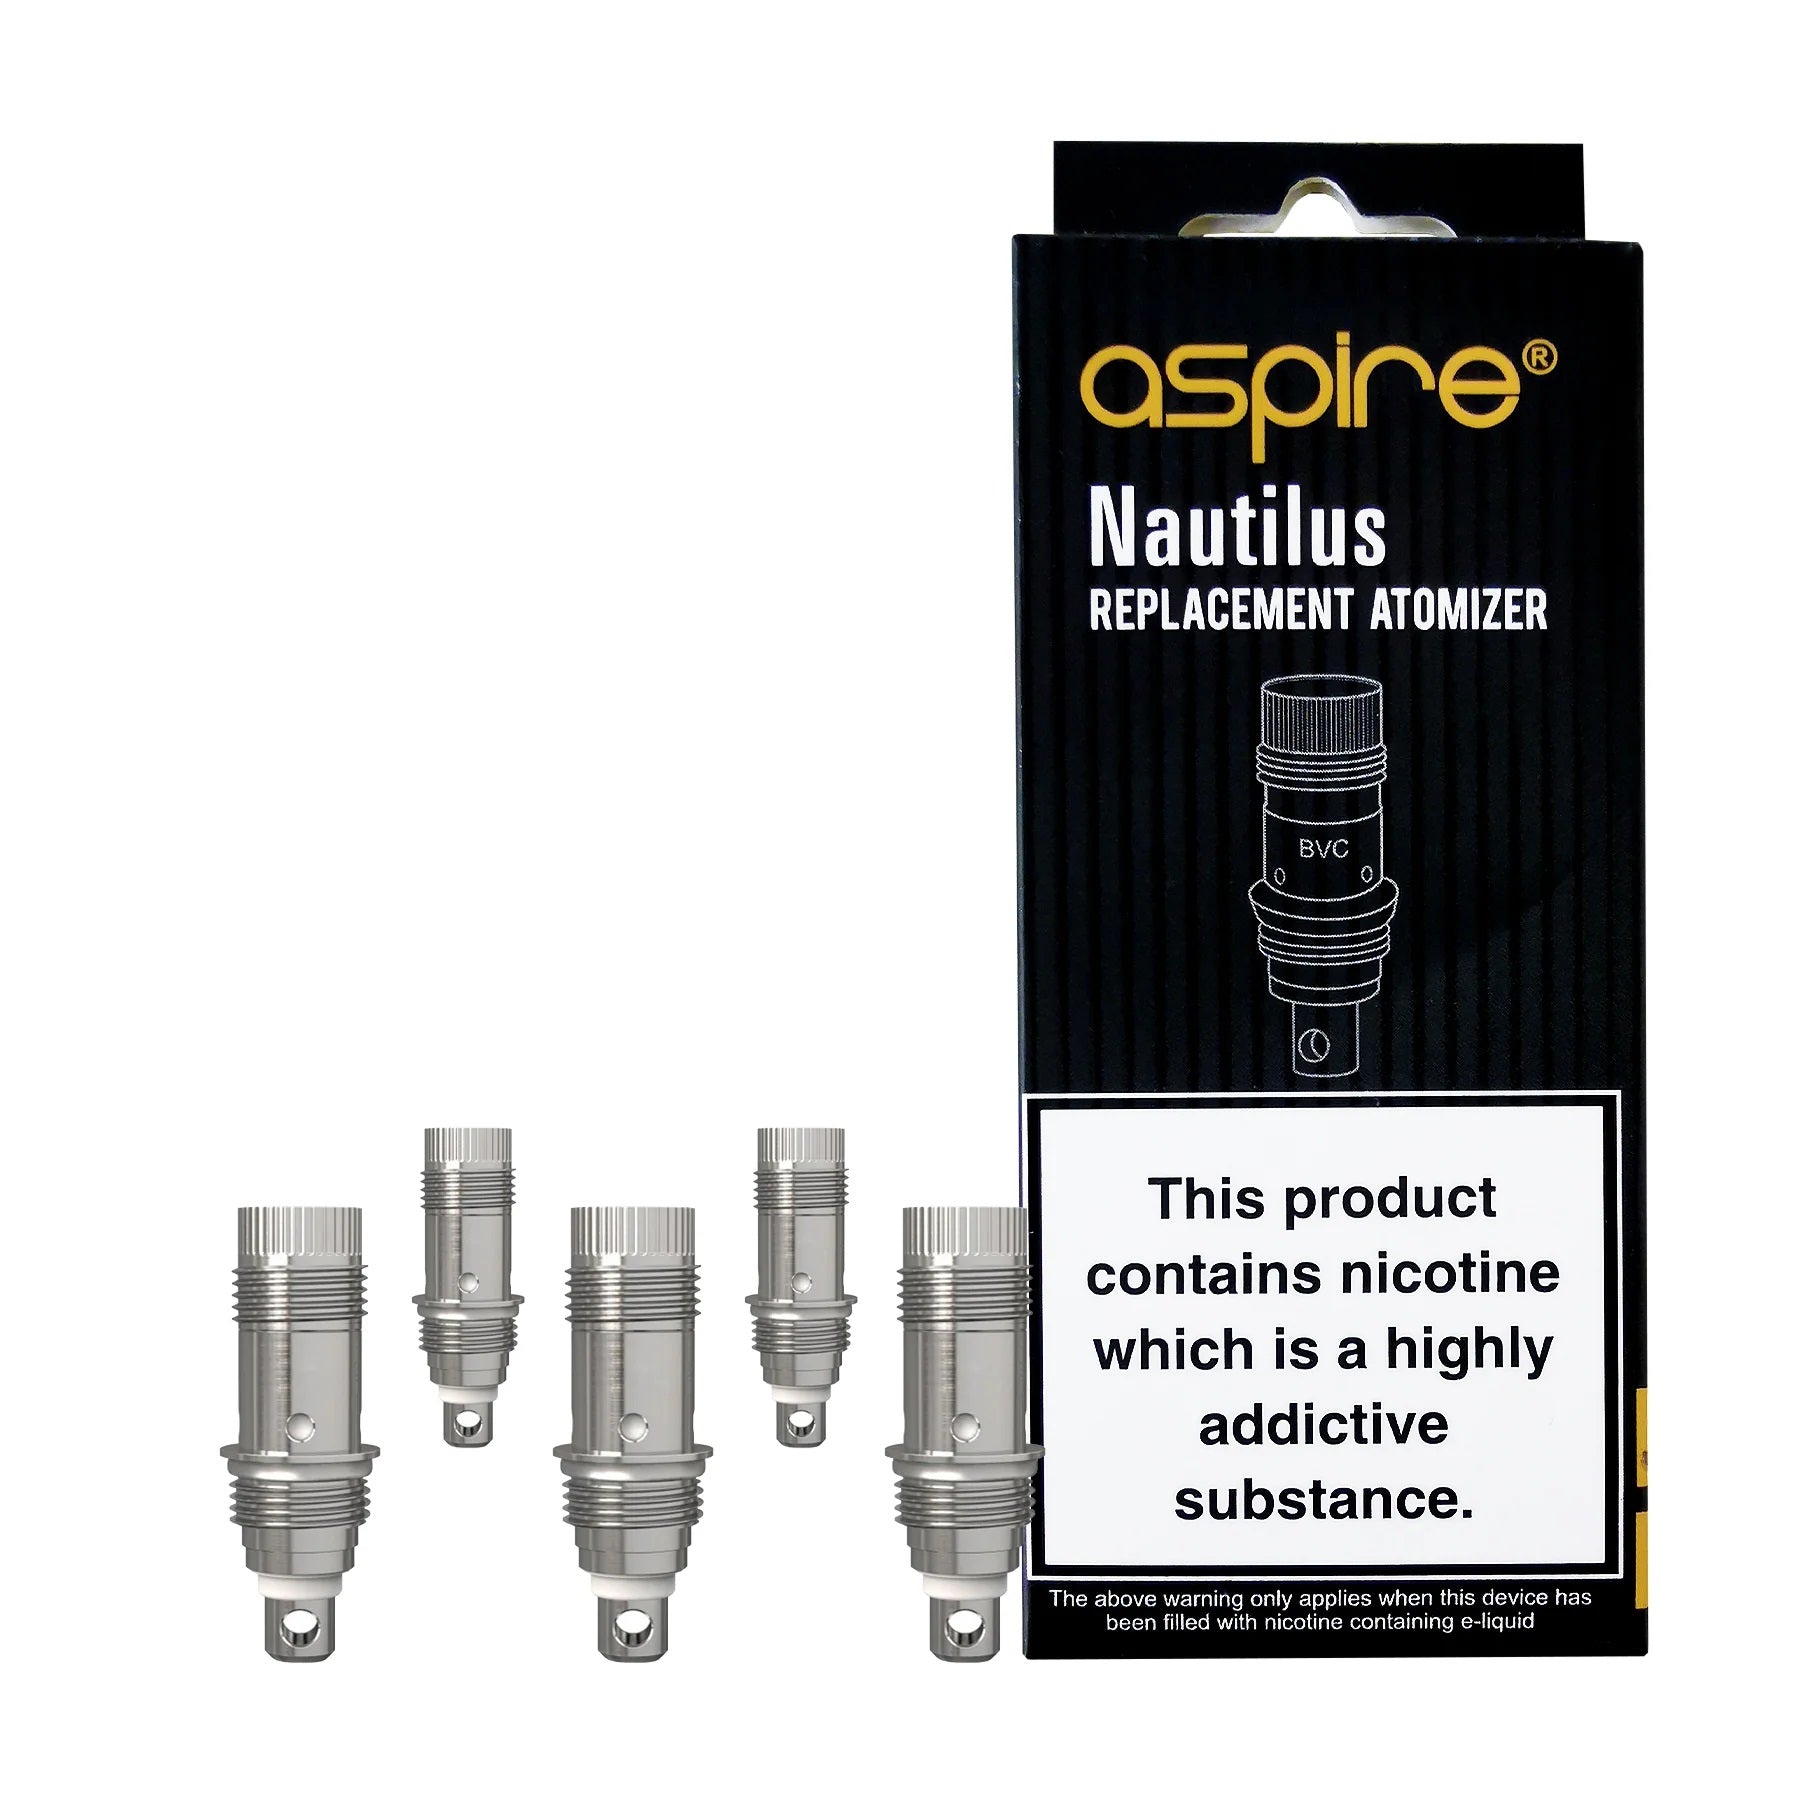 Aspire Nautilus Coils (5 pack) - Explore a wide range of e-liquids, vape kits, accessories, and coils for vapers of all levels - Vape Saloon